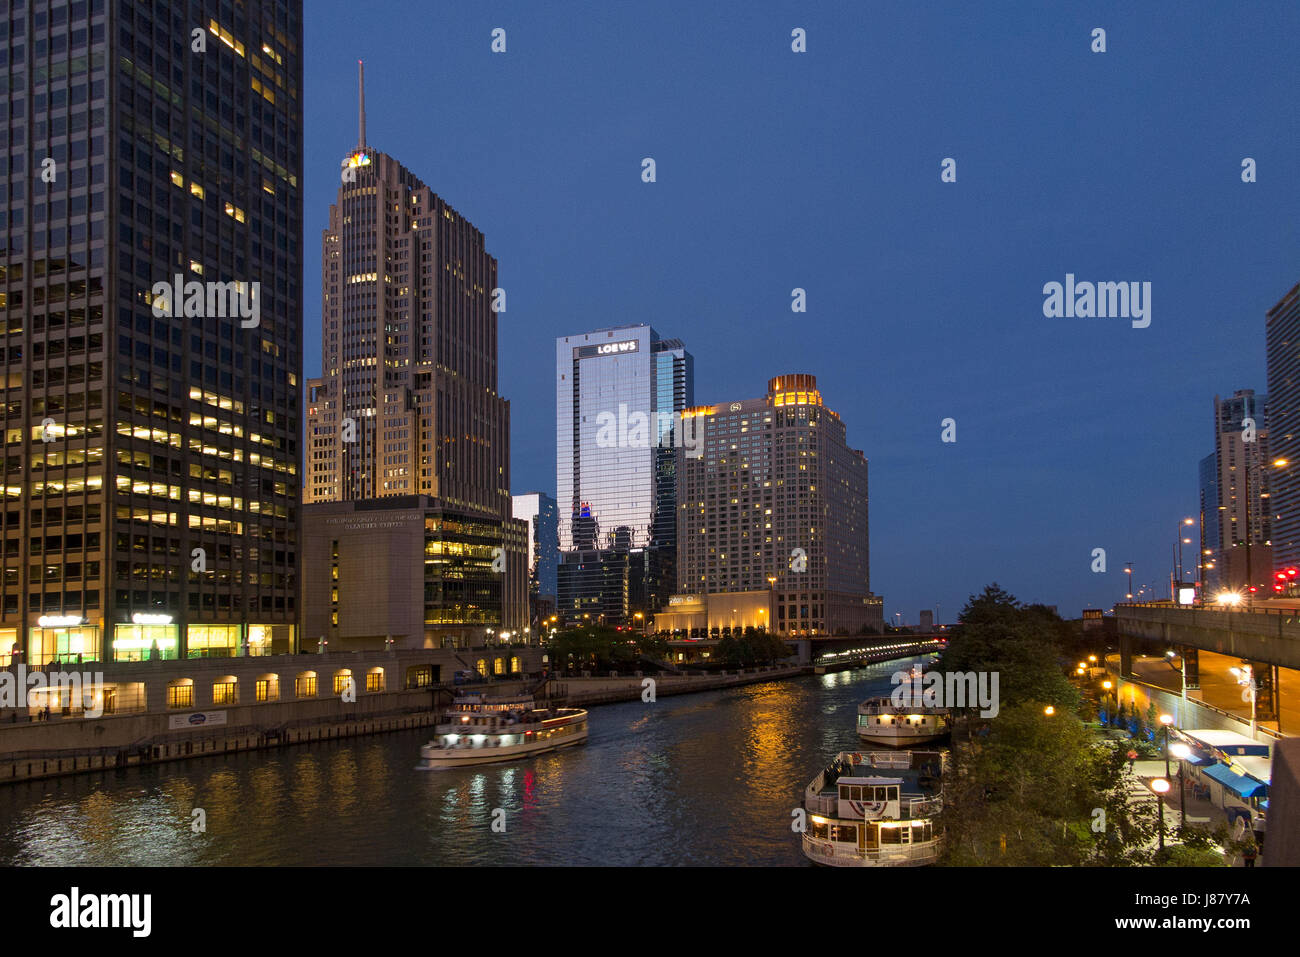 Dusk scenic of buildings and Chicago River USA Stock Photo